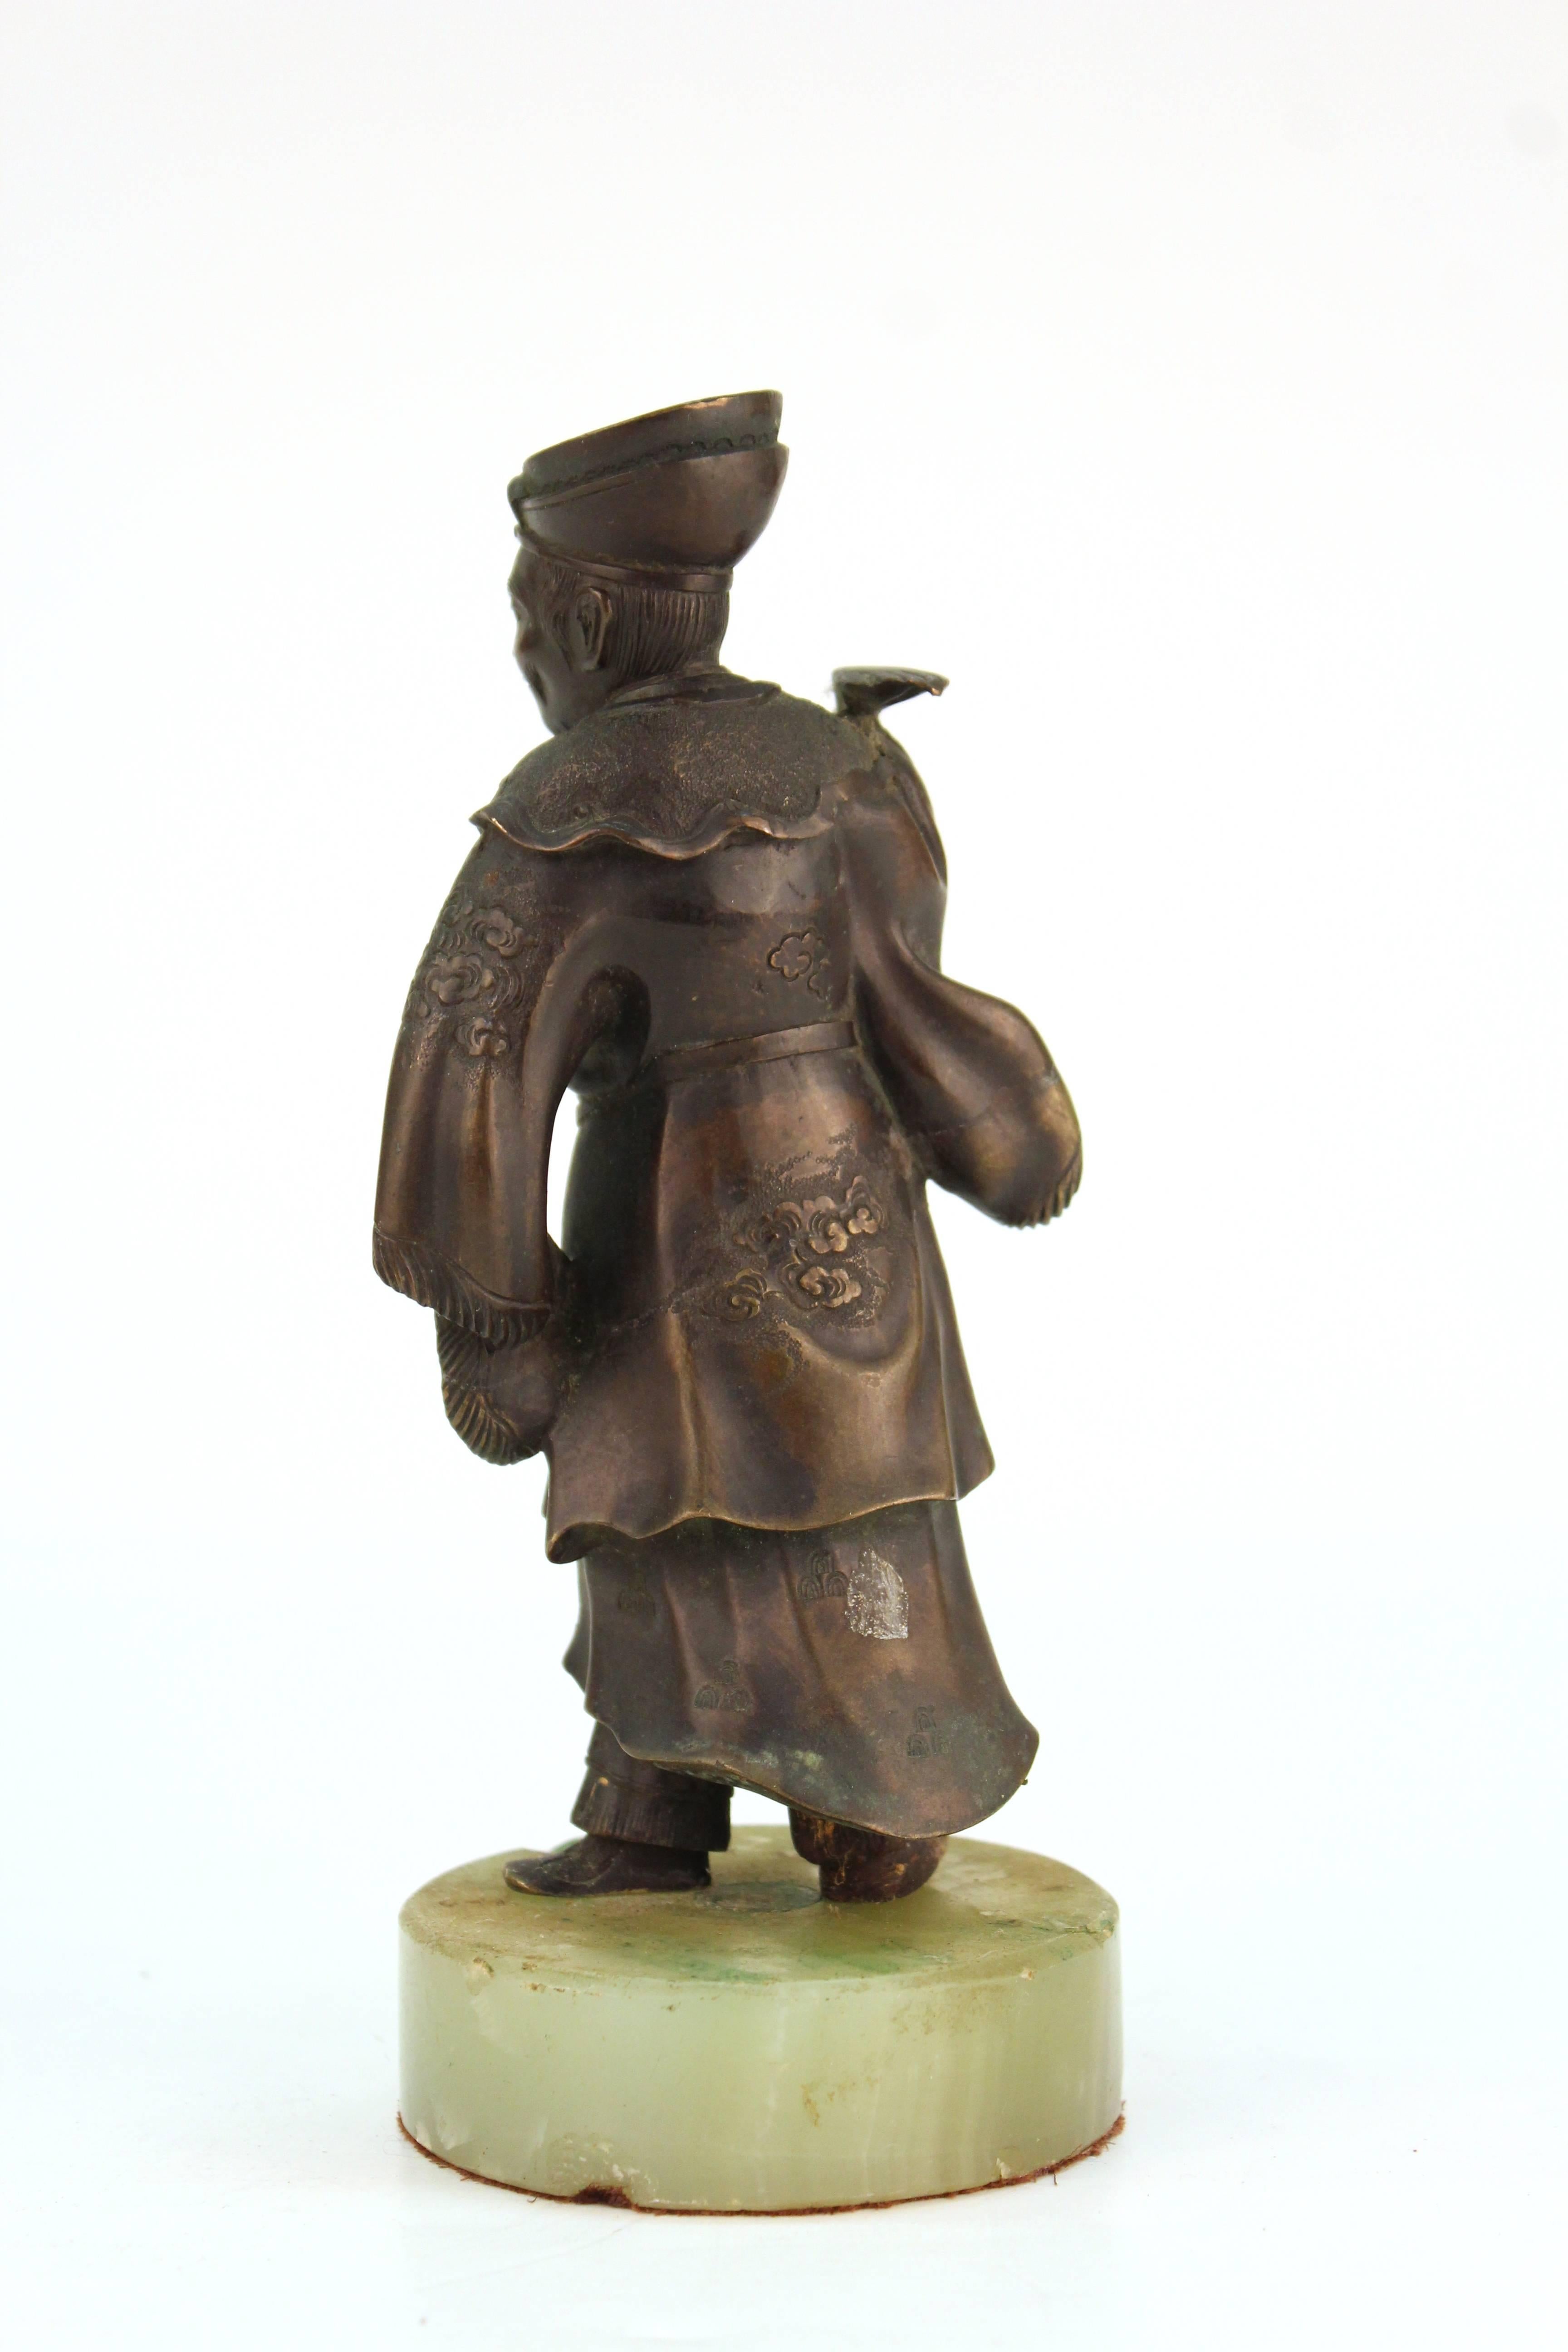 20th Century Japanese Court Figure in Bronzed Metal on Stone Base